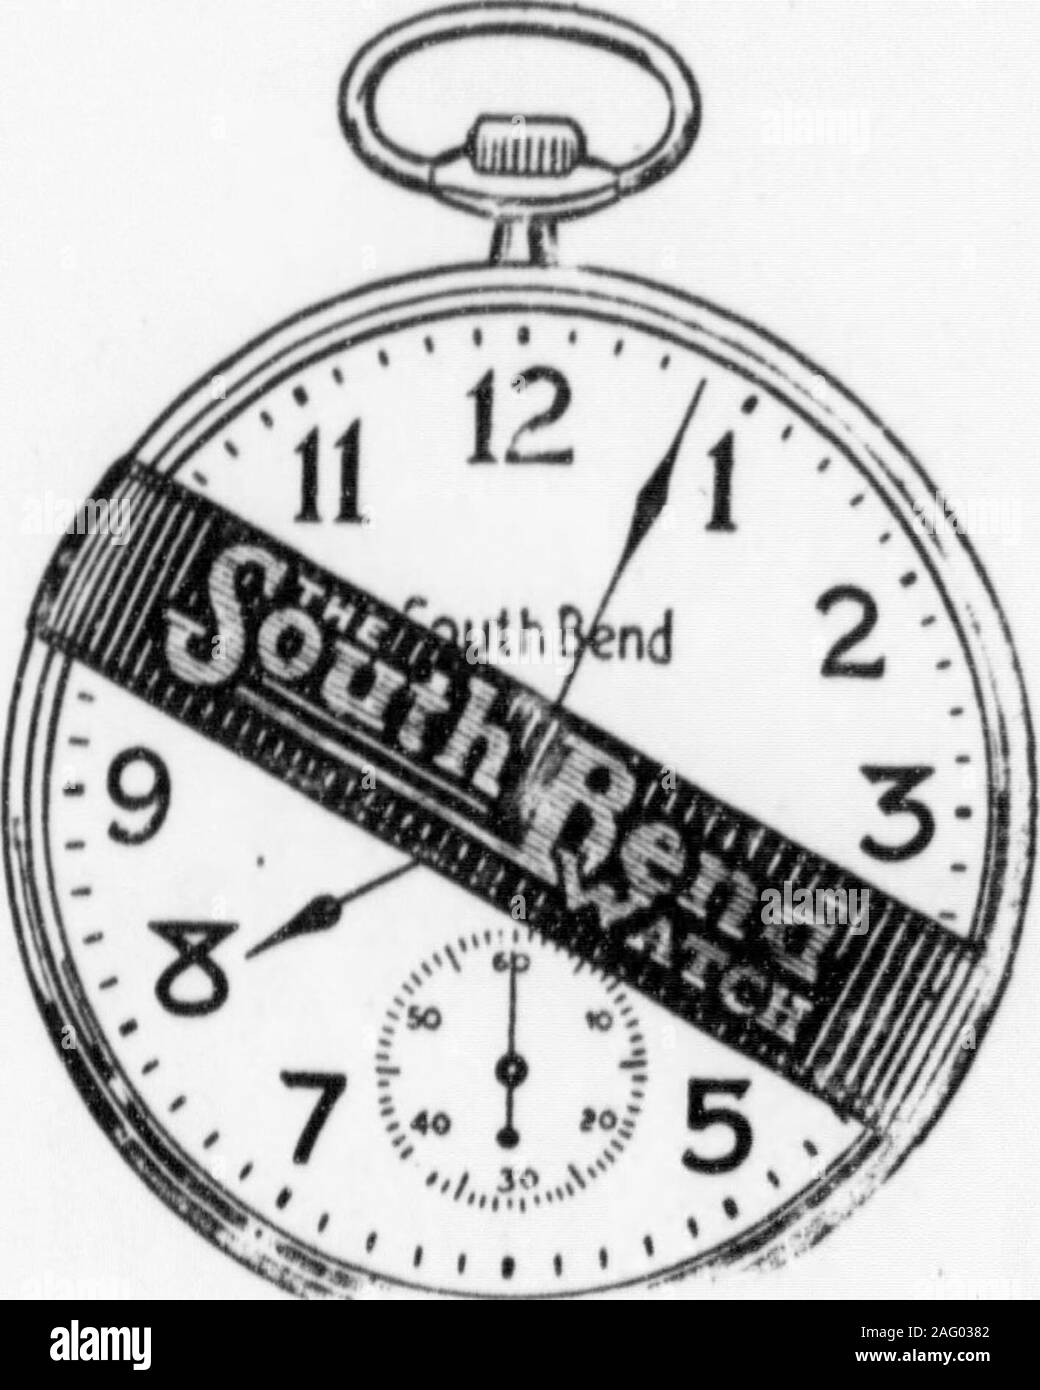 . Highland Echo 1915-1925. ^OOOOOOOOOOOOOQQOOOQOOQOOQC. We Have Just Received Some Attractive New Models in South Bend Watches See our Special Window Display This Week. HOPE BROS. Inc. Jewelers and Stationers Maryville CAMPUS QUIPS The Three Bears were the firstto remember that Monday was St.Patricks day. A FEW FACTS ABOUT EXAMS It has been stated officially thatpractically all the Seniors passed inTheism. Senorita Spanish teacher regretsthat she had to give a low gradet o her heretofore most brilliantstudent. The night watchman vows thathe saw mysterious flickering lightsin Pearsons at all ho Stock Photo